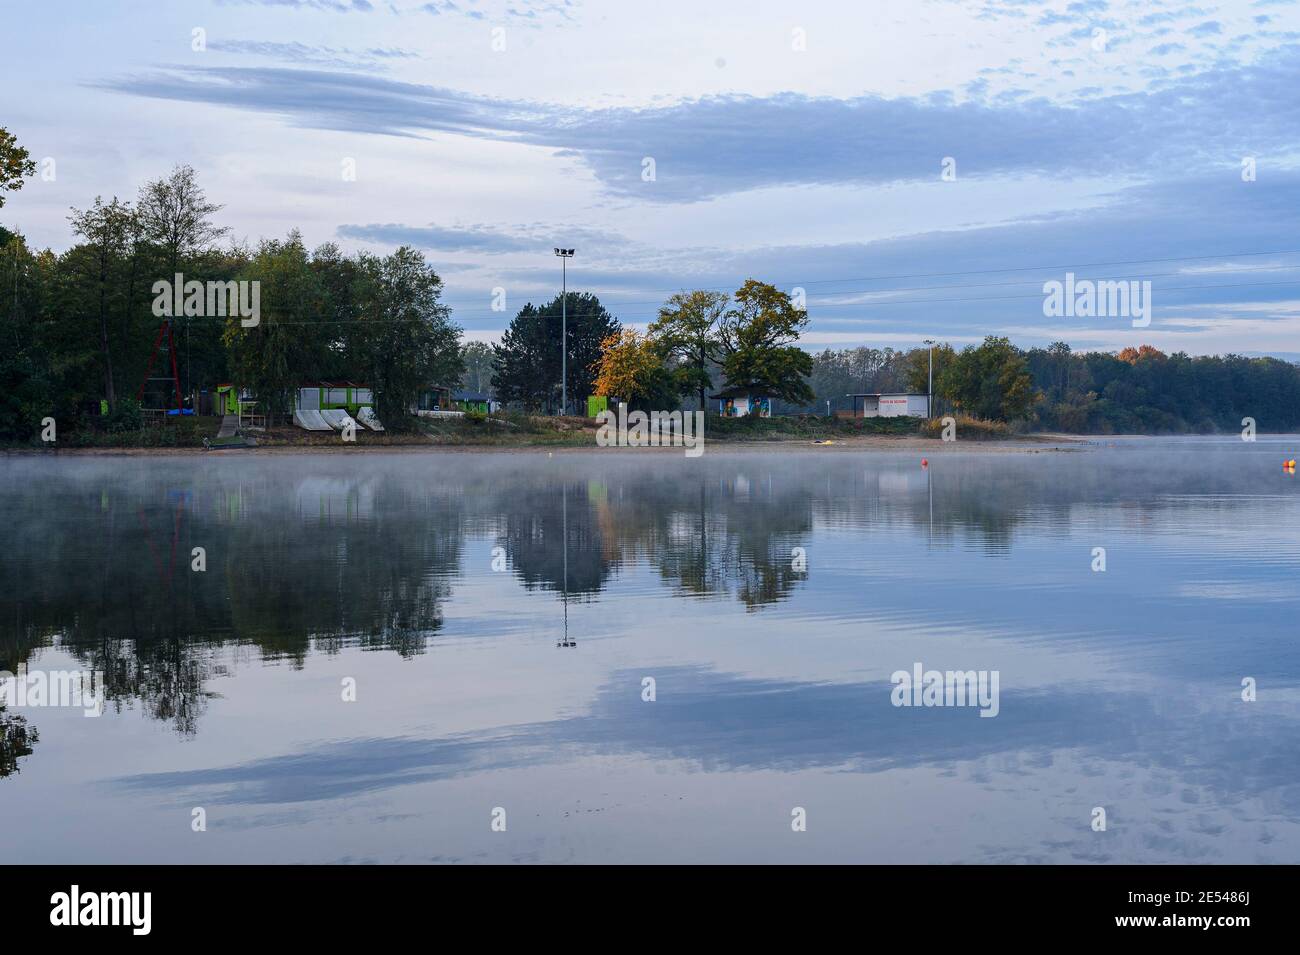 One of the shores of the lake is occupied by an amusement park. This park is closed at the end of the summer and calm returns to the shores. Stock Photo